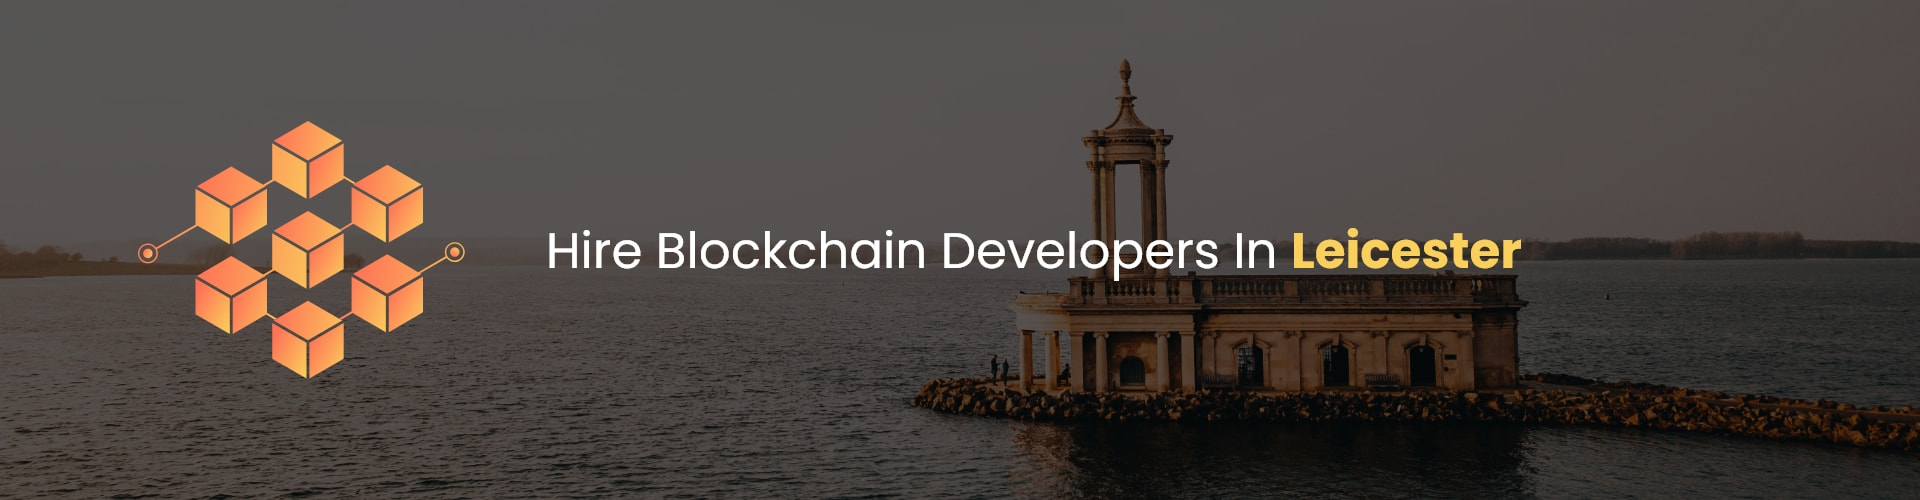 hire blockchain developers in leicester